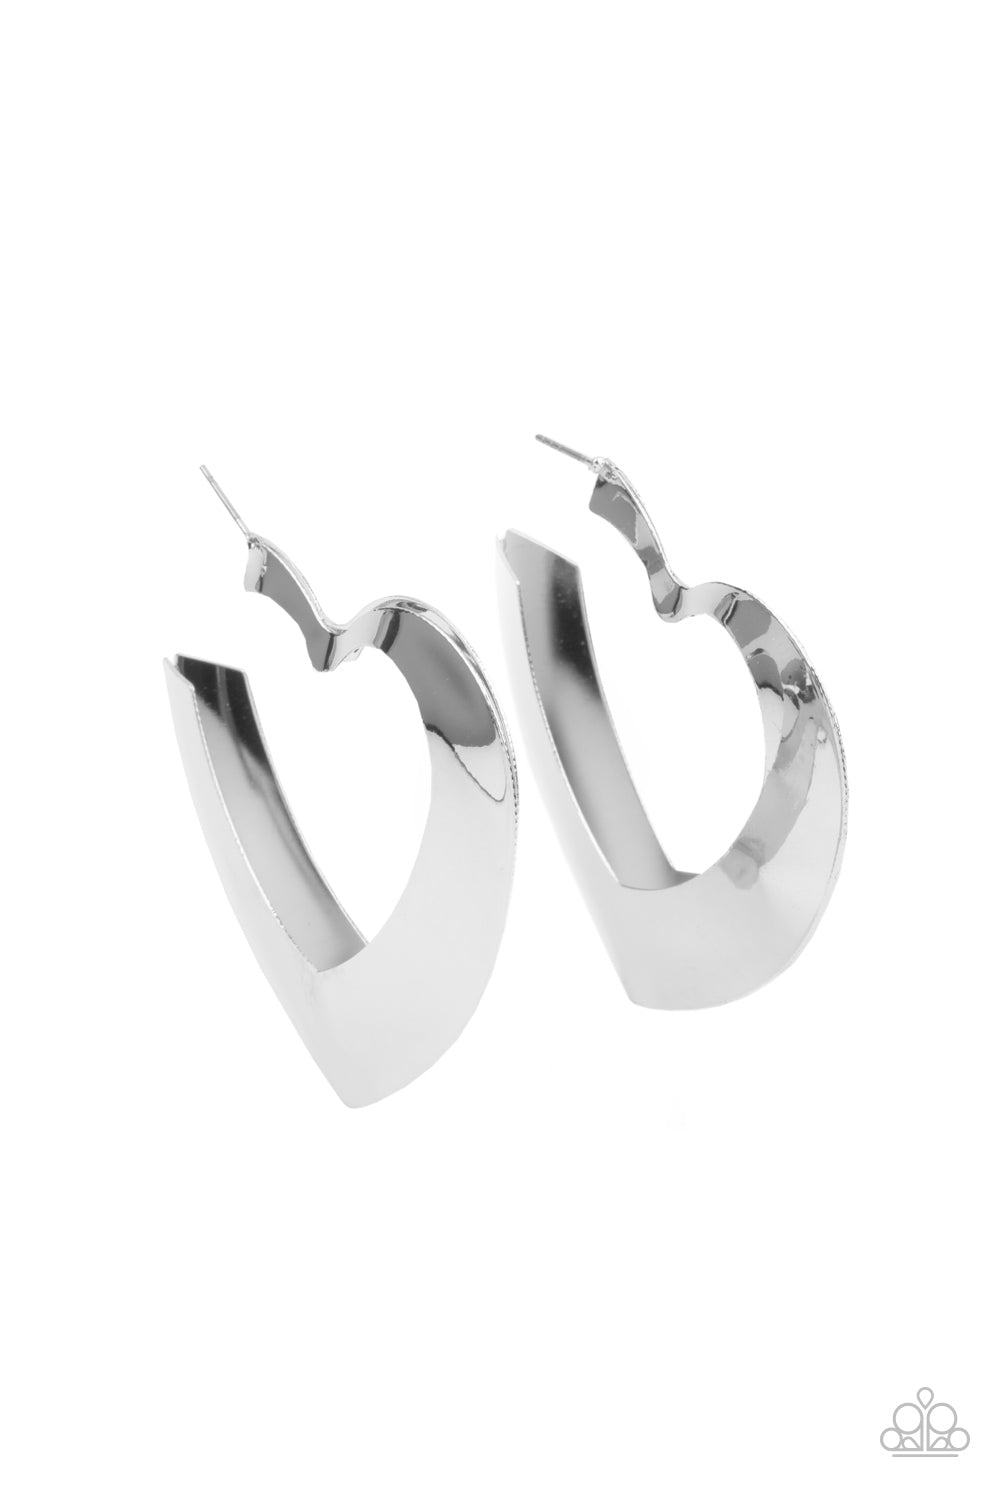 Paparazzi Accessories Heart-Racing Radiance - Silver Heart Earrings - Lady T Accessories